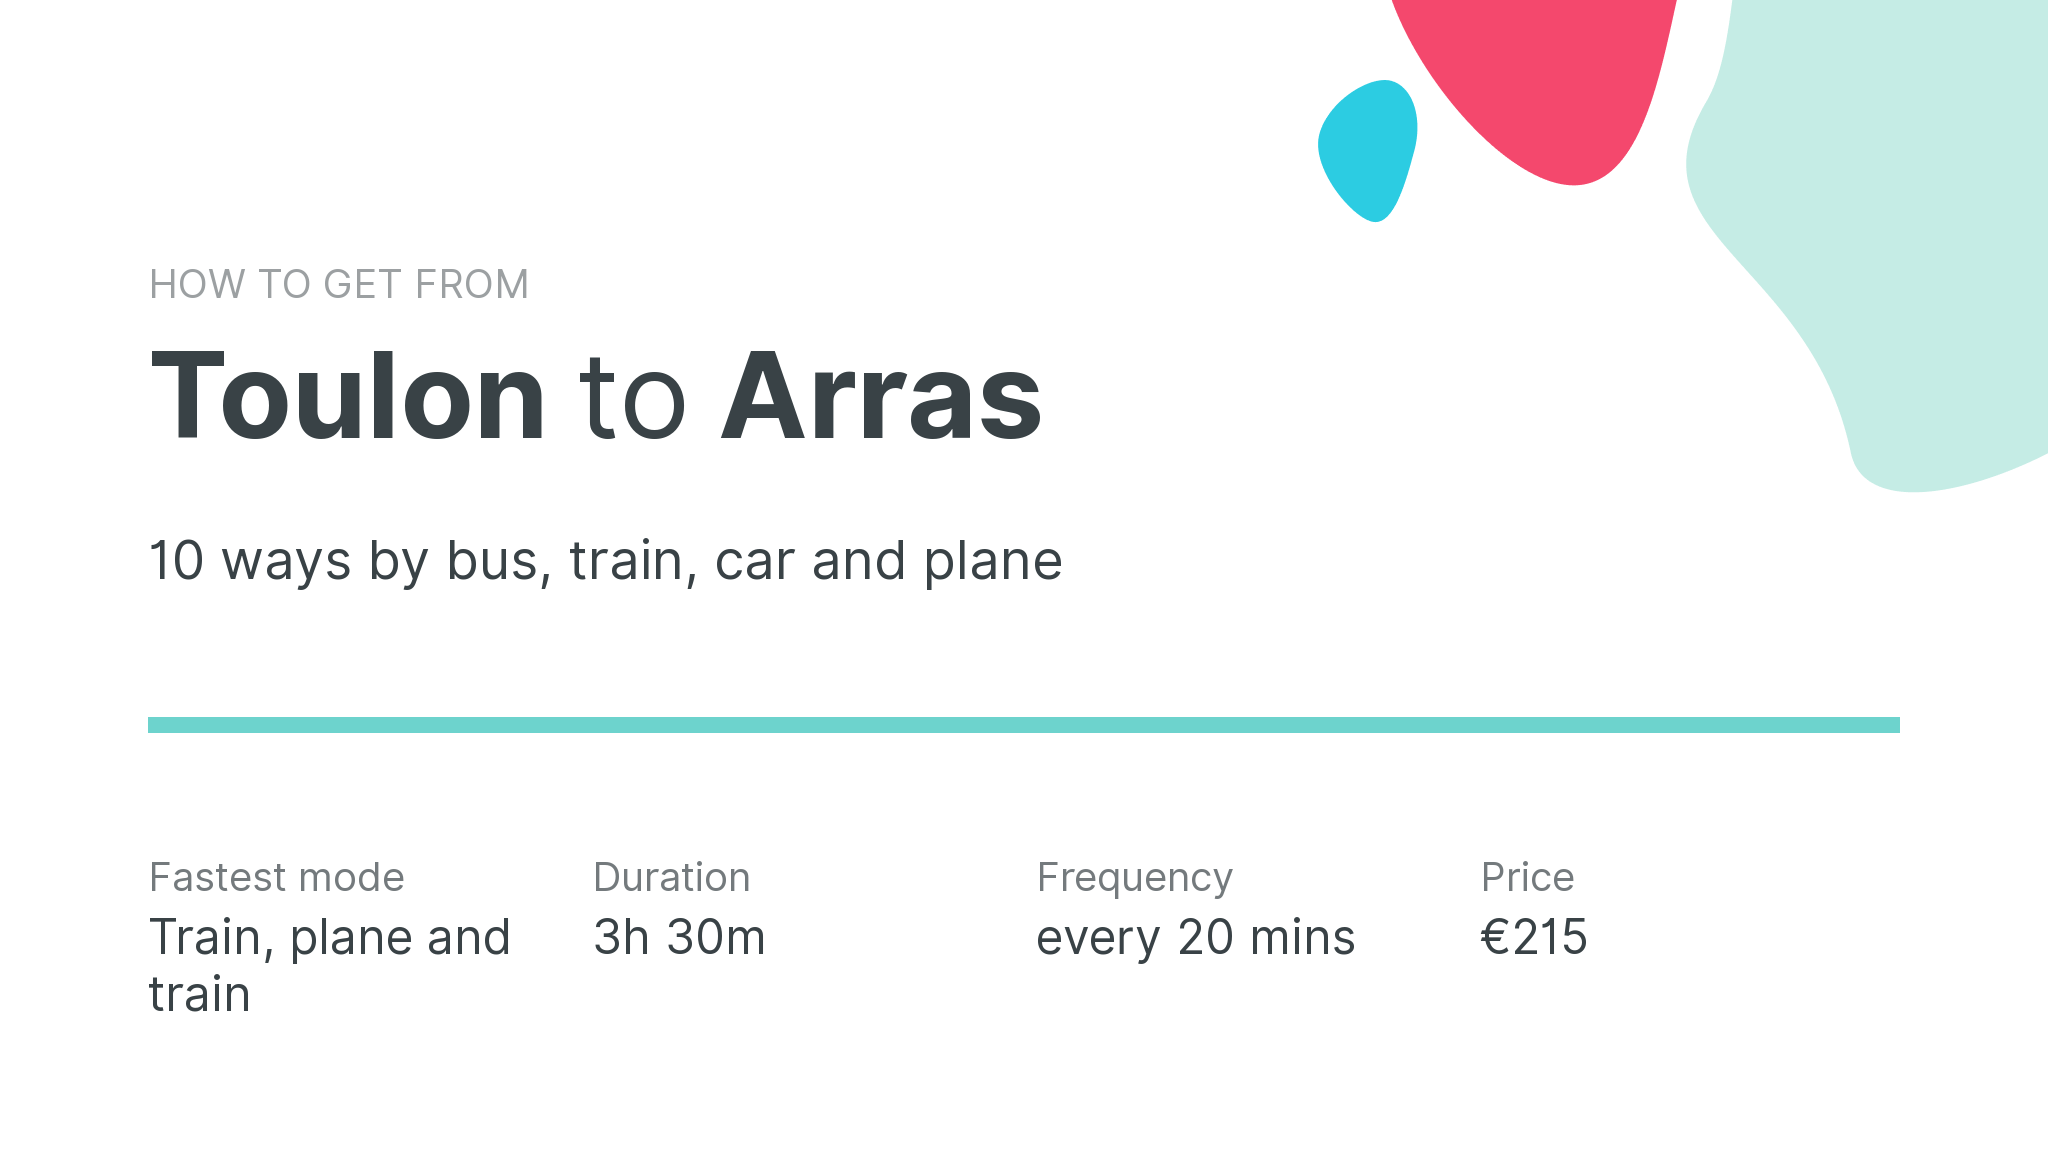 How do I get from Toulon to Arras